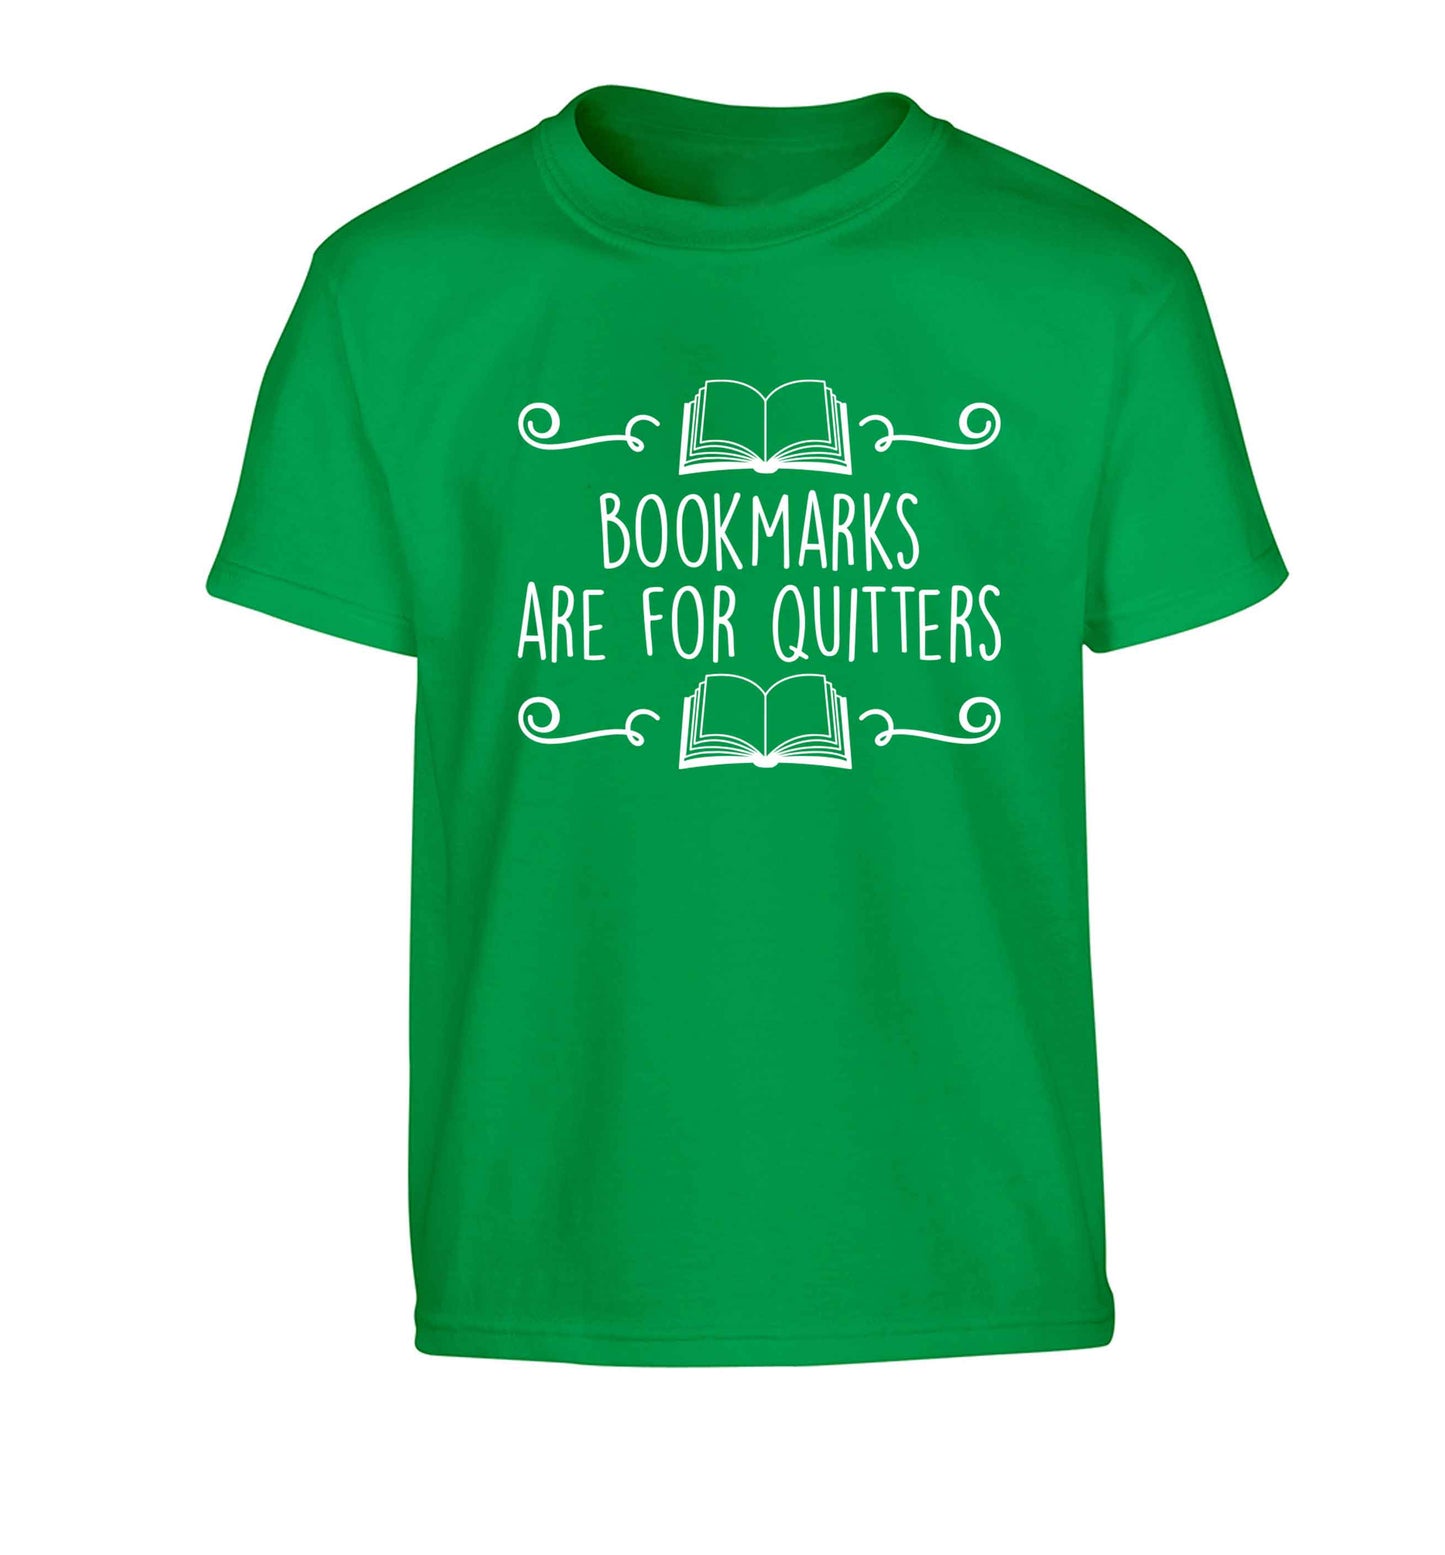 Bookmarks are for quitters Children's green Tshirt 12-13 Years